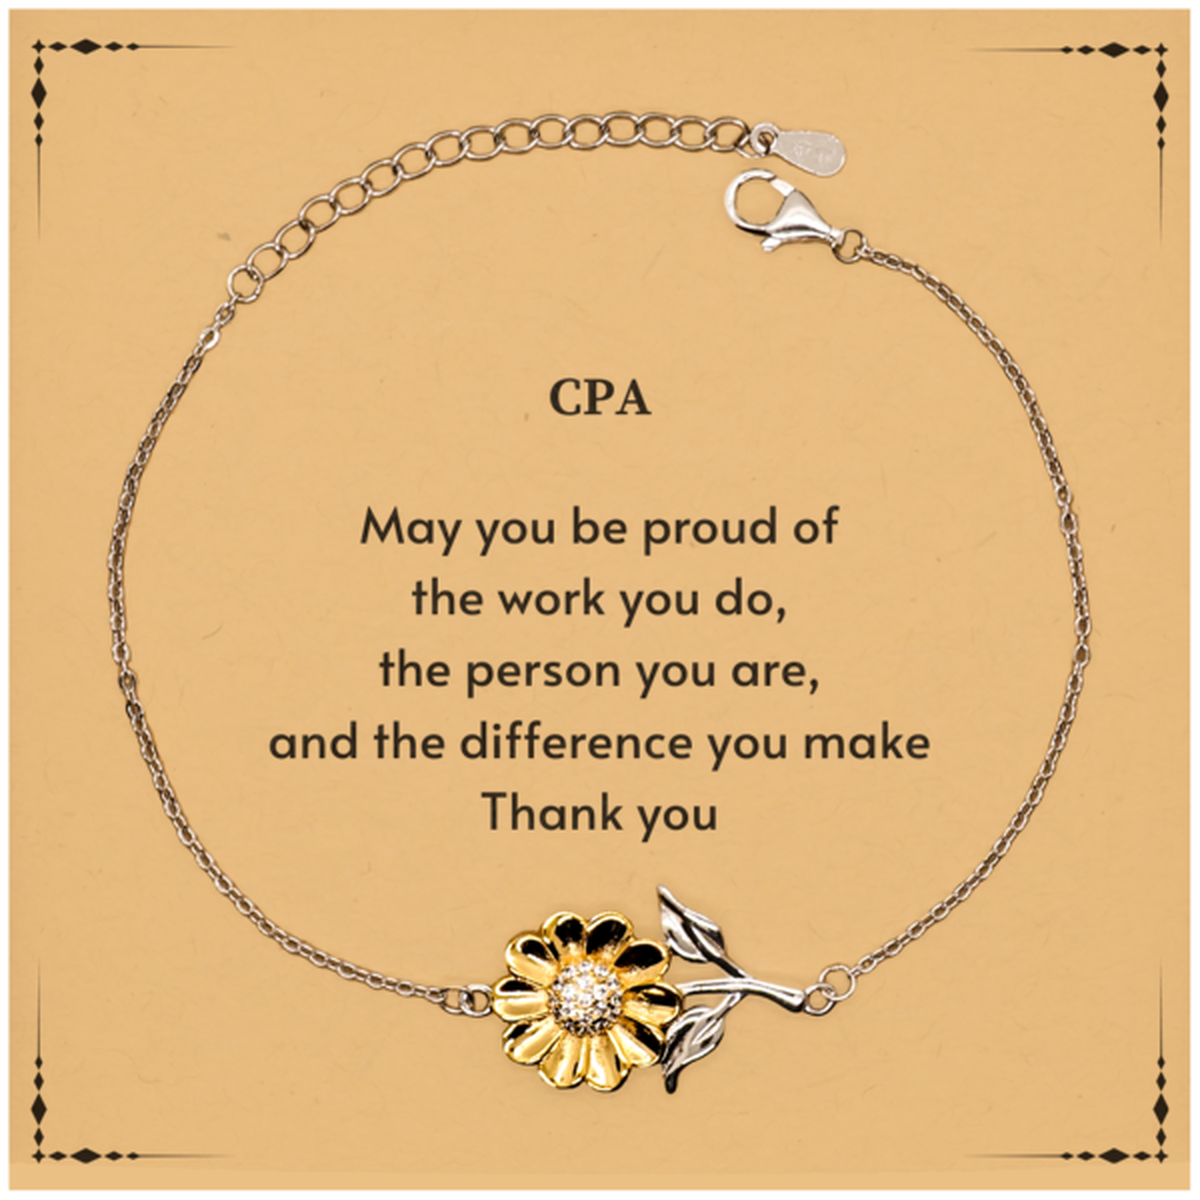 Heartwarming Sunflower Bracelet Retirement Coworkers Gifts for CPA, CPA May You be proud of the work you do, the person you are Gifts for Boss Men Women Friends